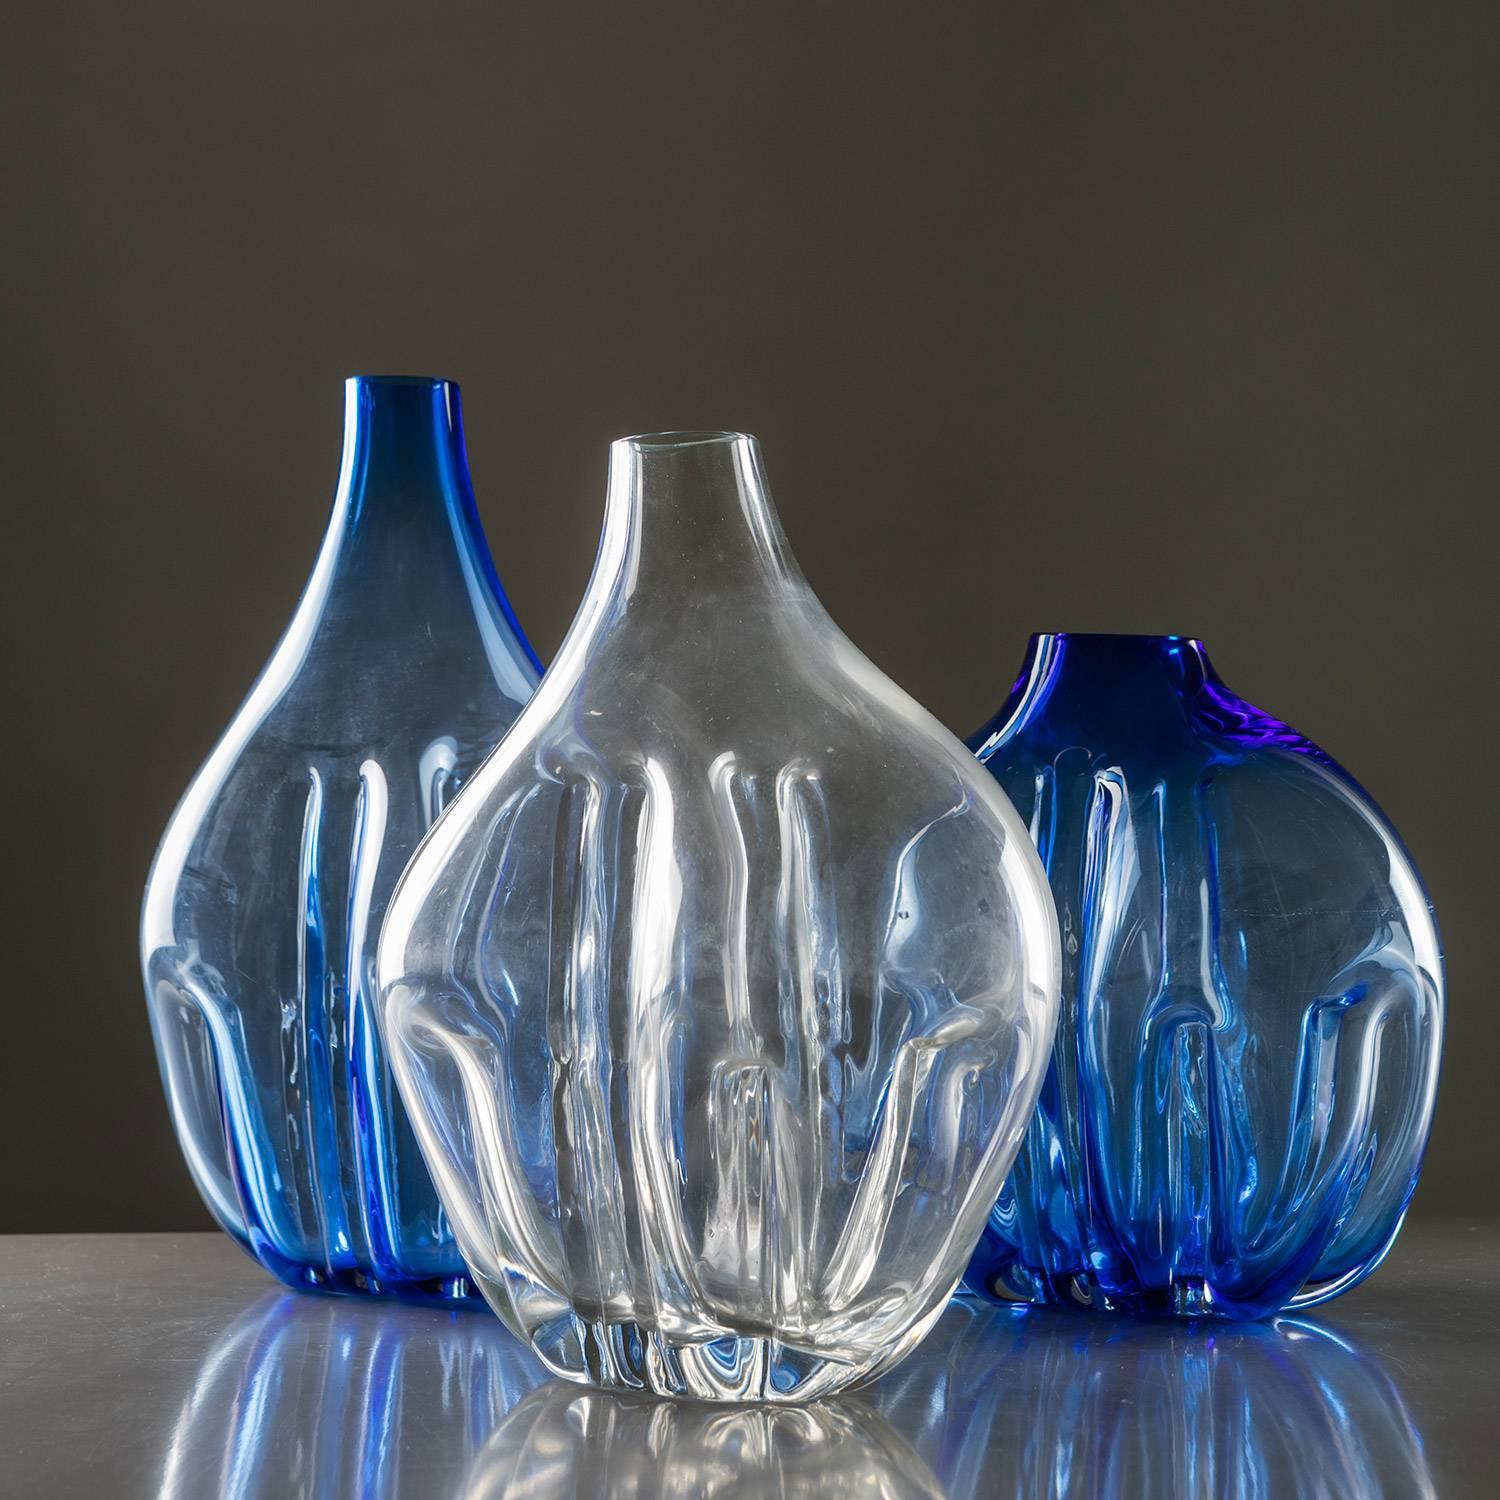 Outstanding Murano glass vases by Toni Zuccheri.
The piece is part of an experimental collection with crystal glass made by Zuccheri blowing the glass against strange shaped molds and worked then with tongs.
Size refers to the tallest piece.